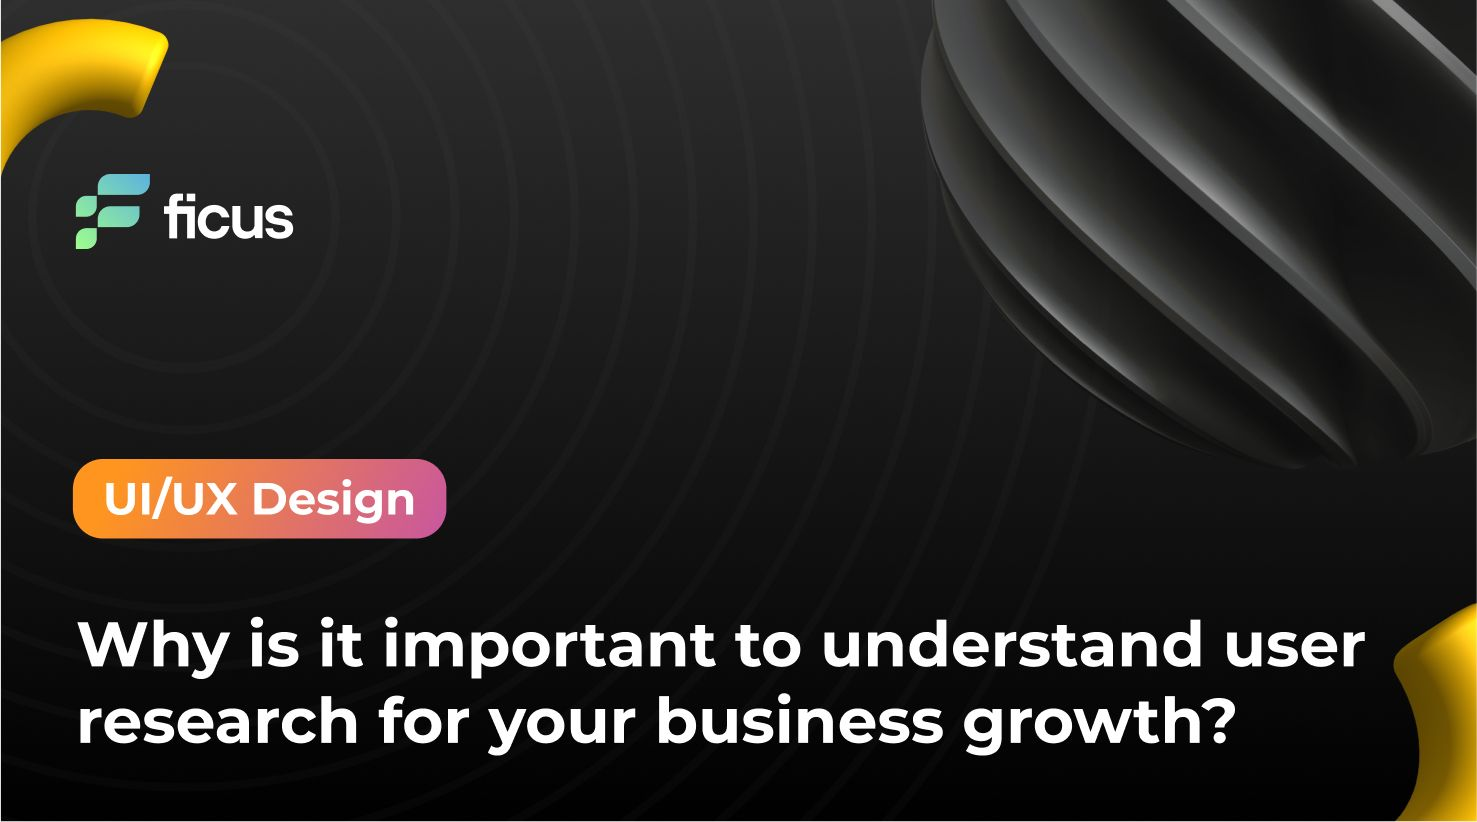 Why is it important to understand user research for your business growth?